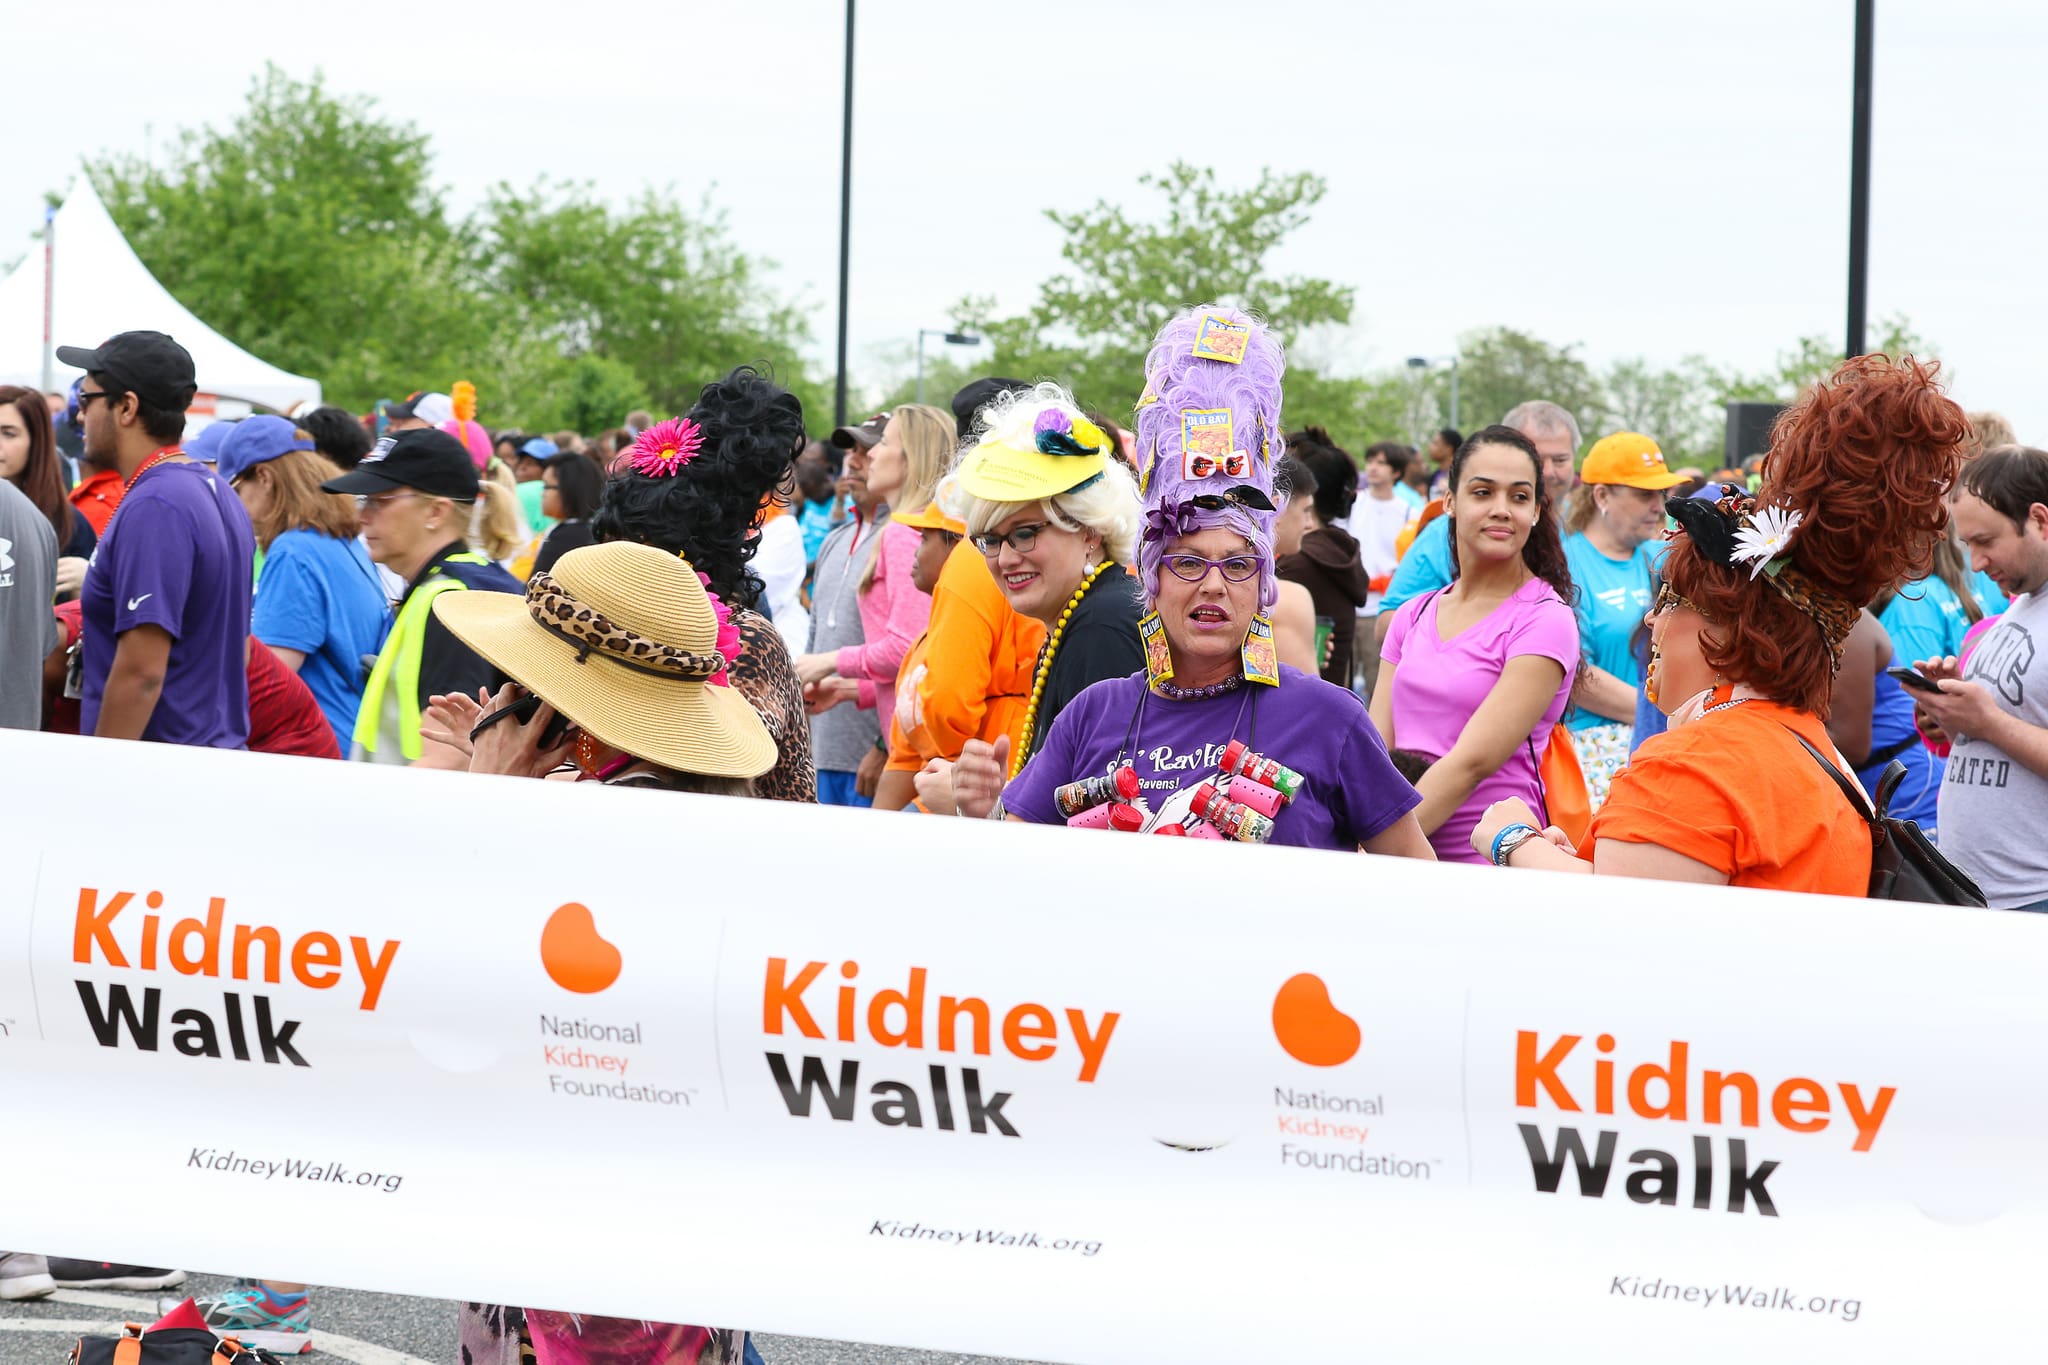 Maryland Kidney Walk Returning to InPerson Event at UMBC, Oct. 23